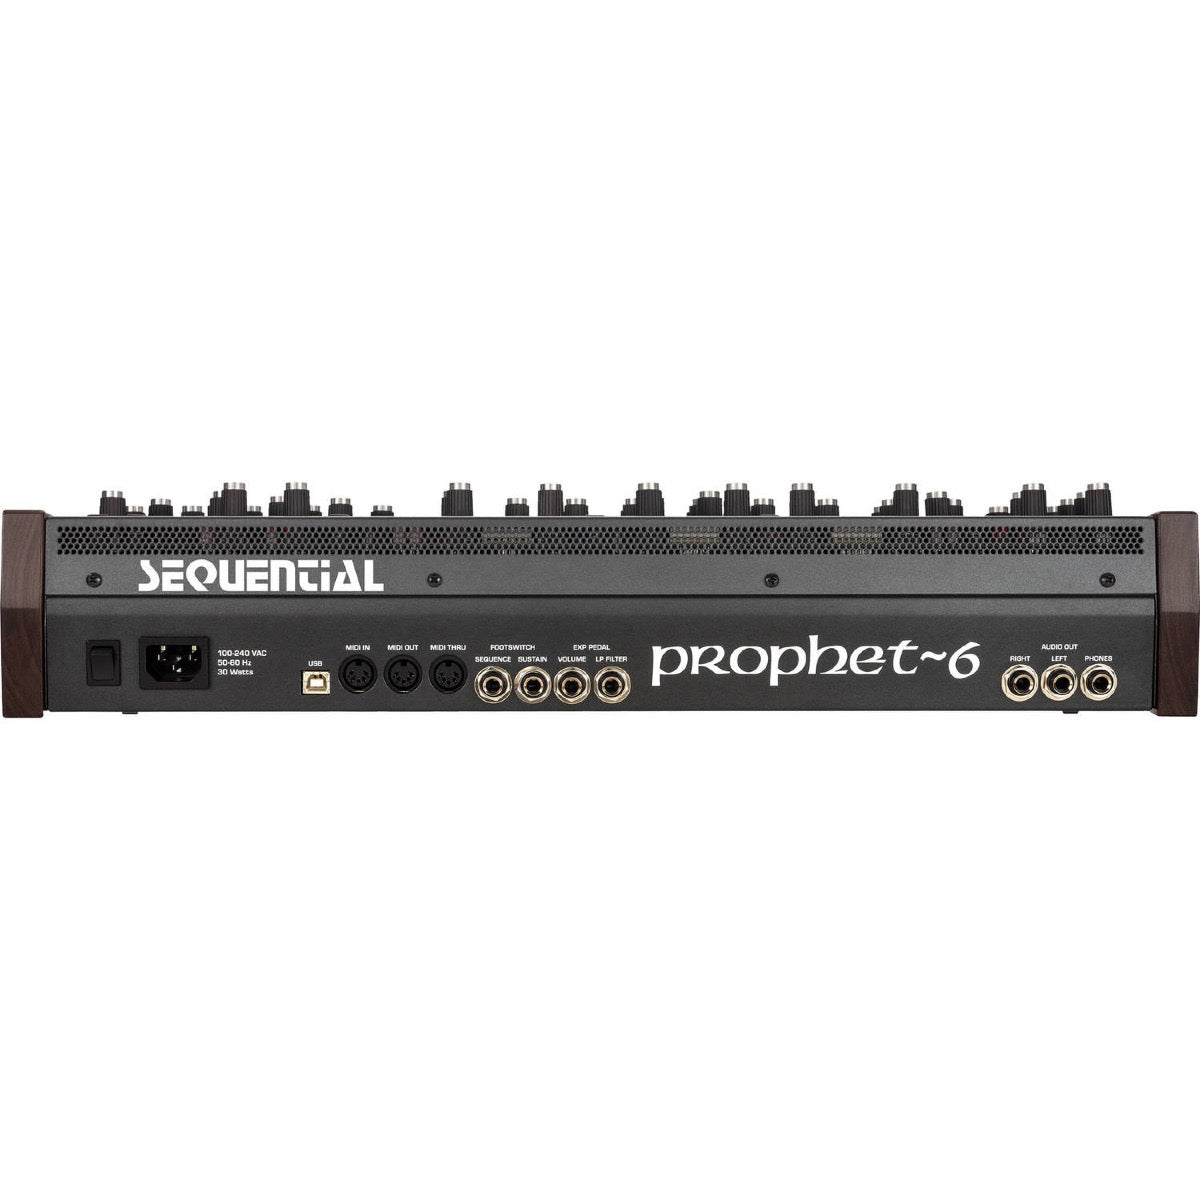 Sequential Prophet-6 Desktop Module 6-voice Polyphonic Analog Synthesizer